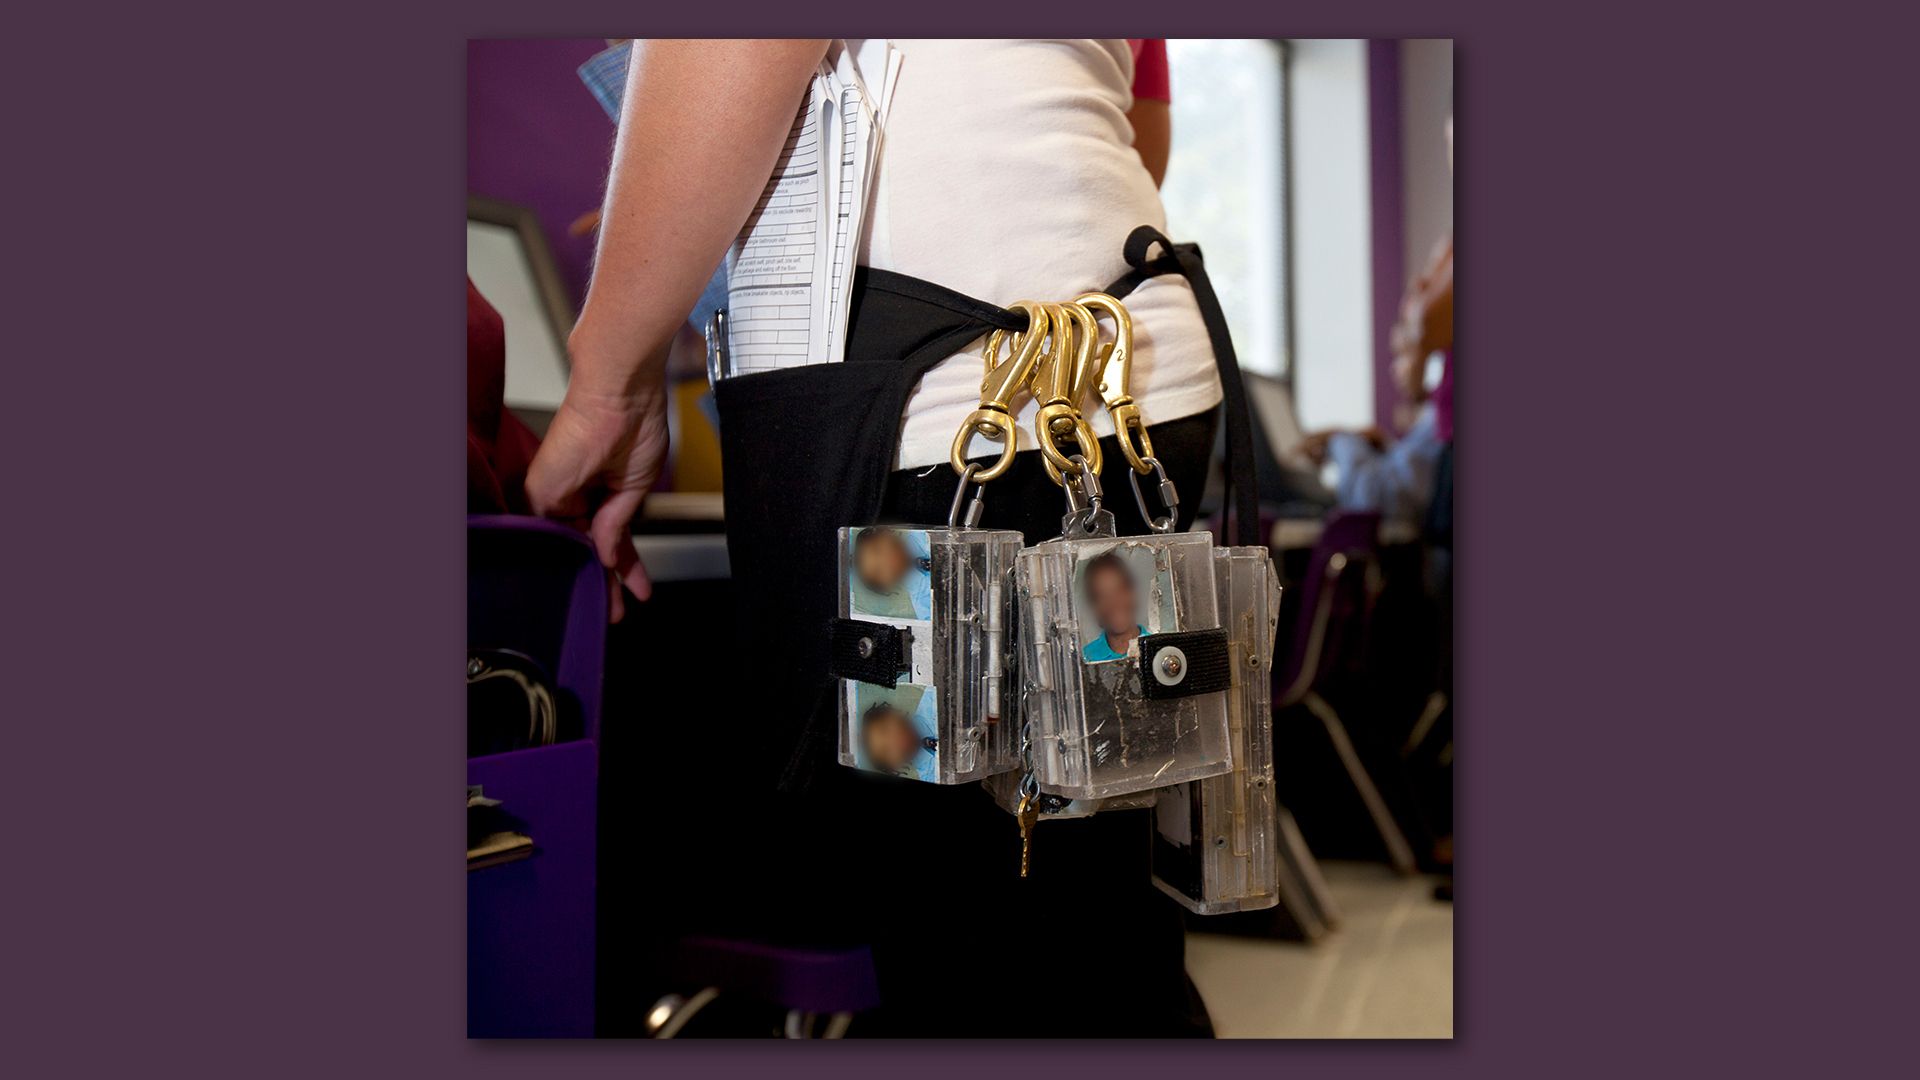 Photo of a teacher with a belt containing electric shock remote control devices